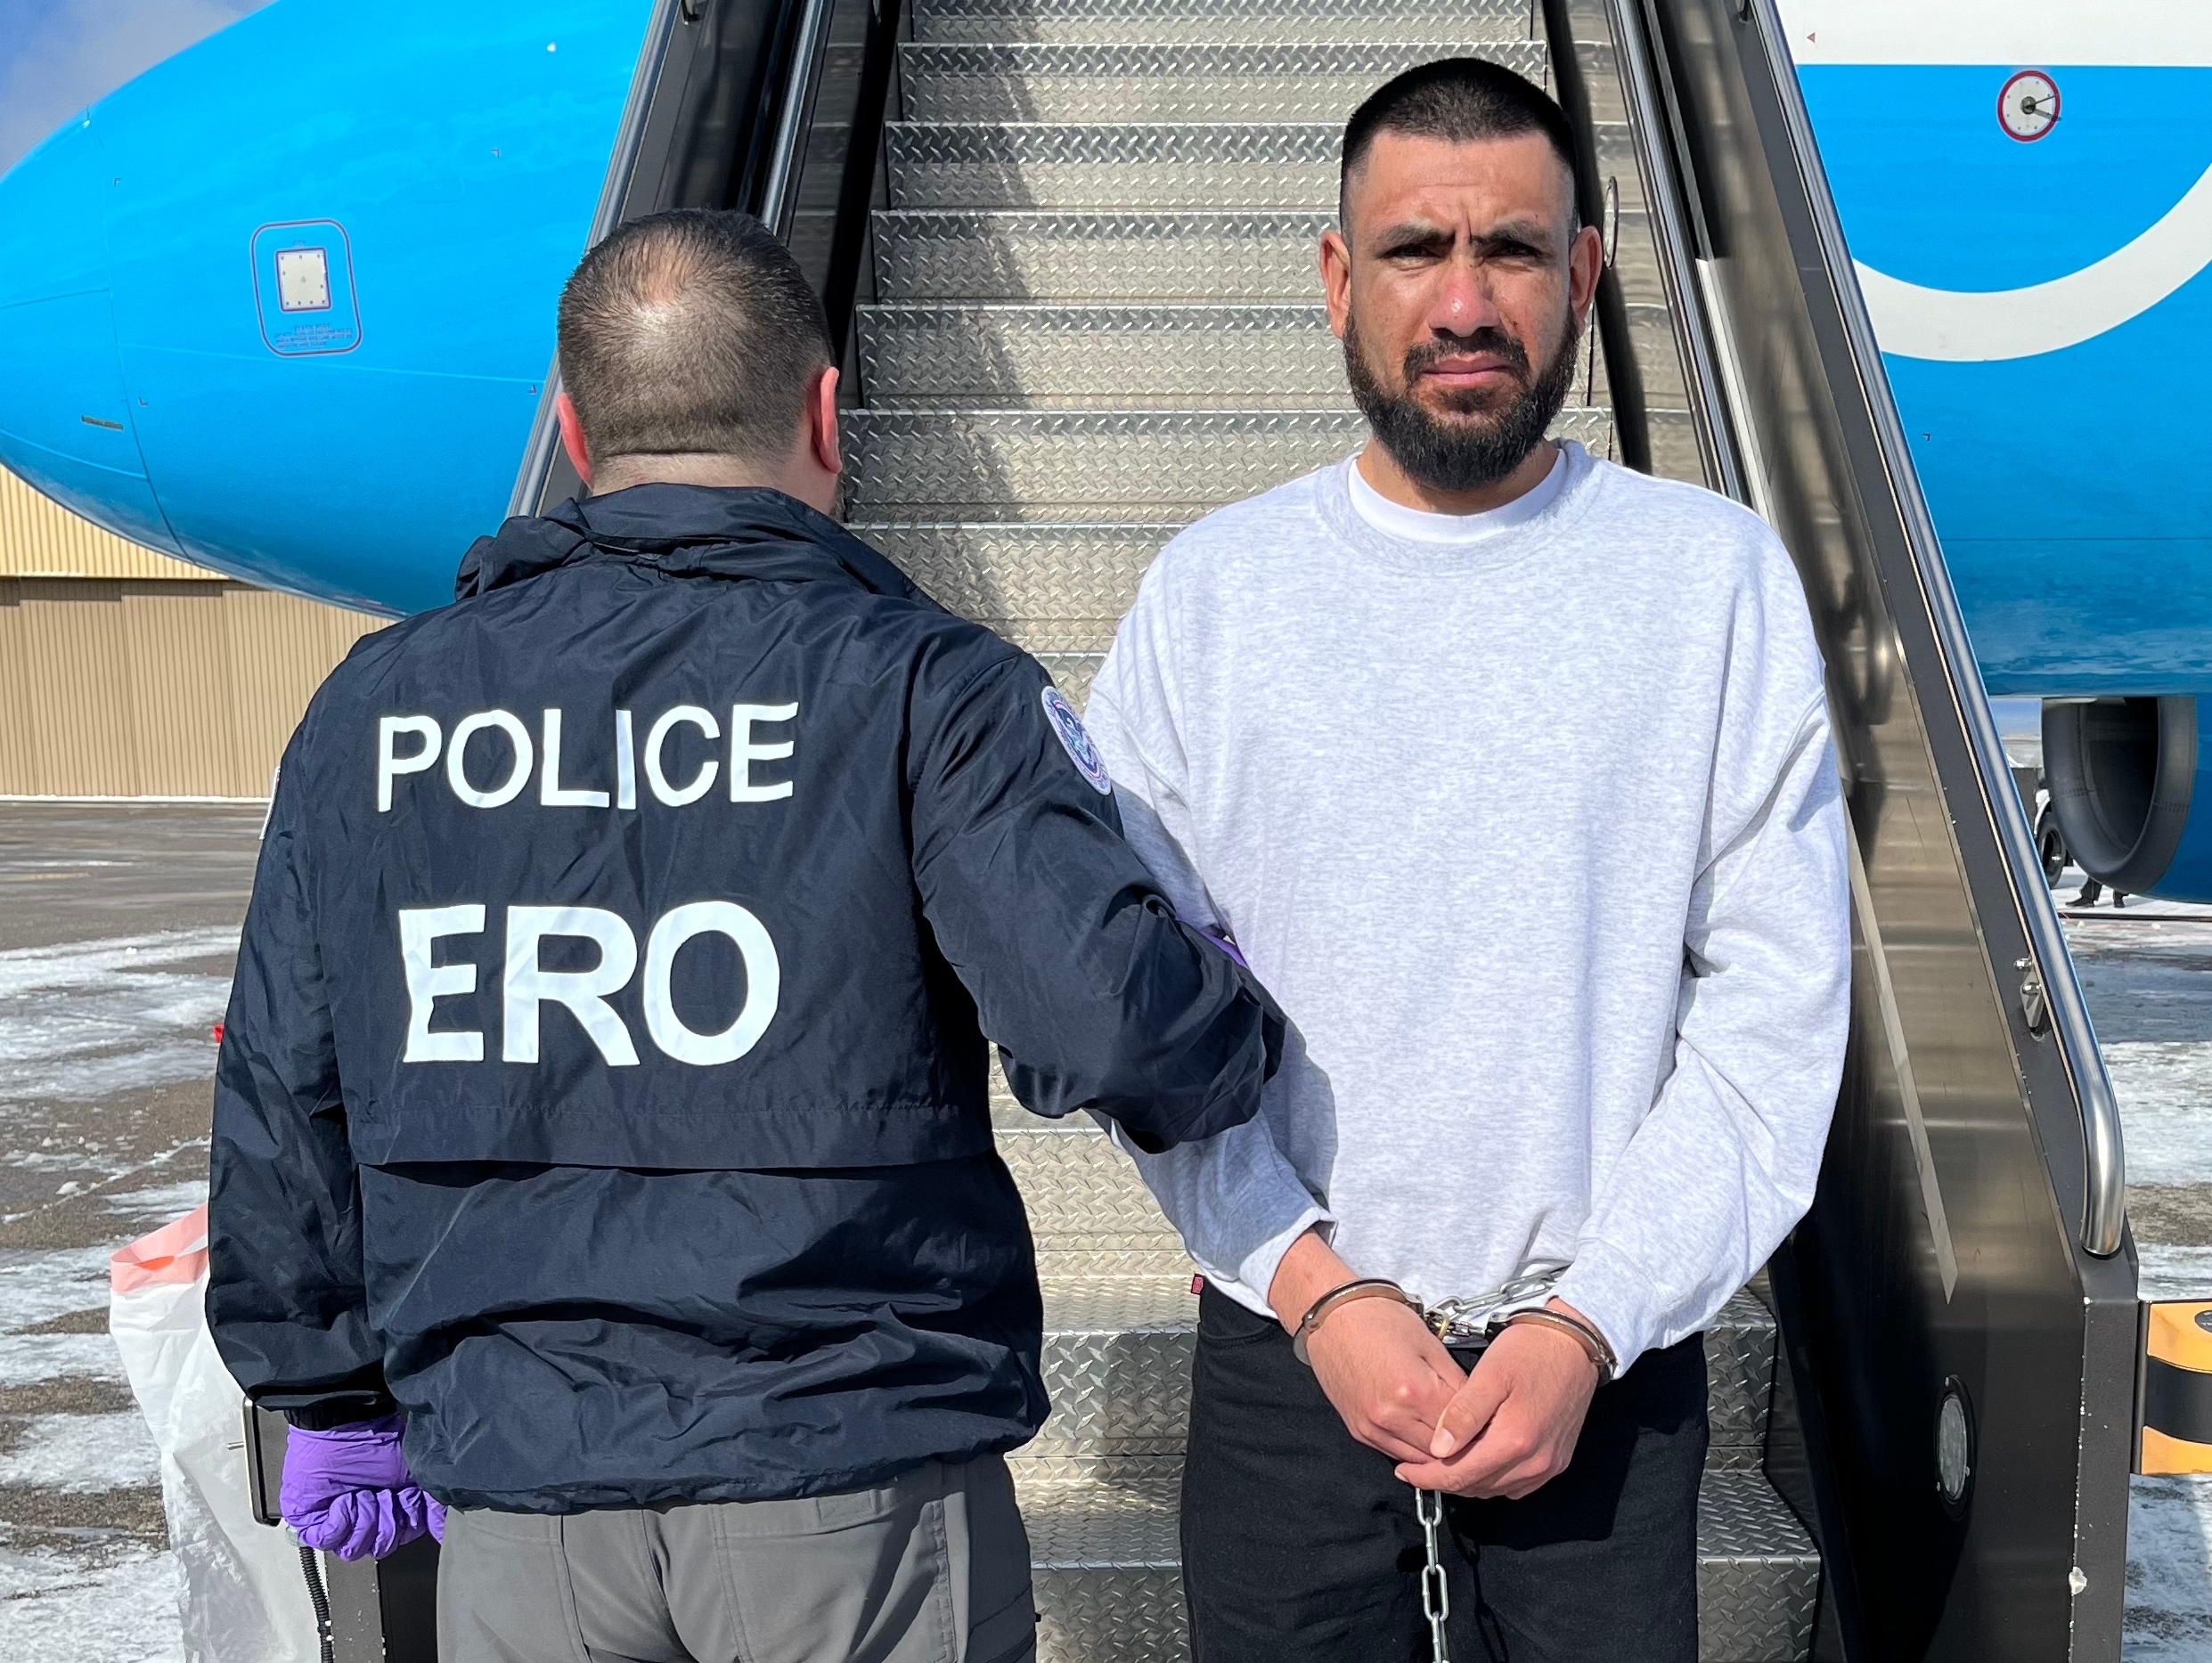 Victor Manuel Jimenez Ruiz, 33-year-old citizen of Mexico, was escorted by ERO officers from St. Paul, Minnesota, to the Brownsville, Texas, port of entry where he was transferred to Mexican authorities. Since 2006, Jimenez Ruiz has been removed from the U.S. eight times for immigration violations.